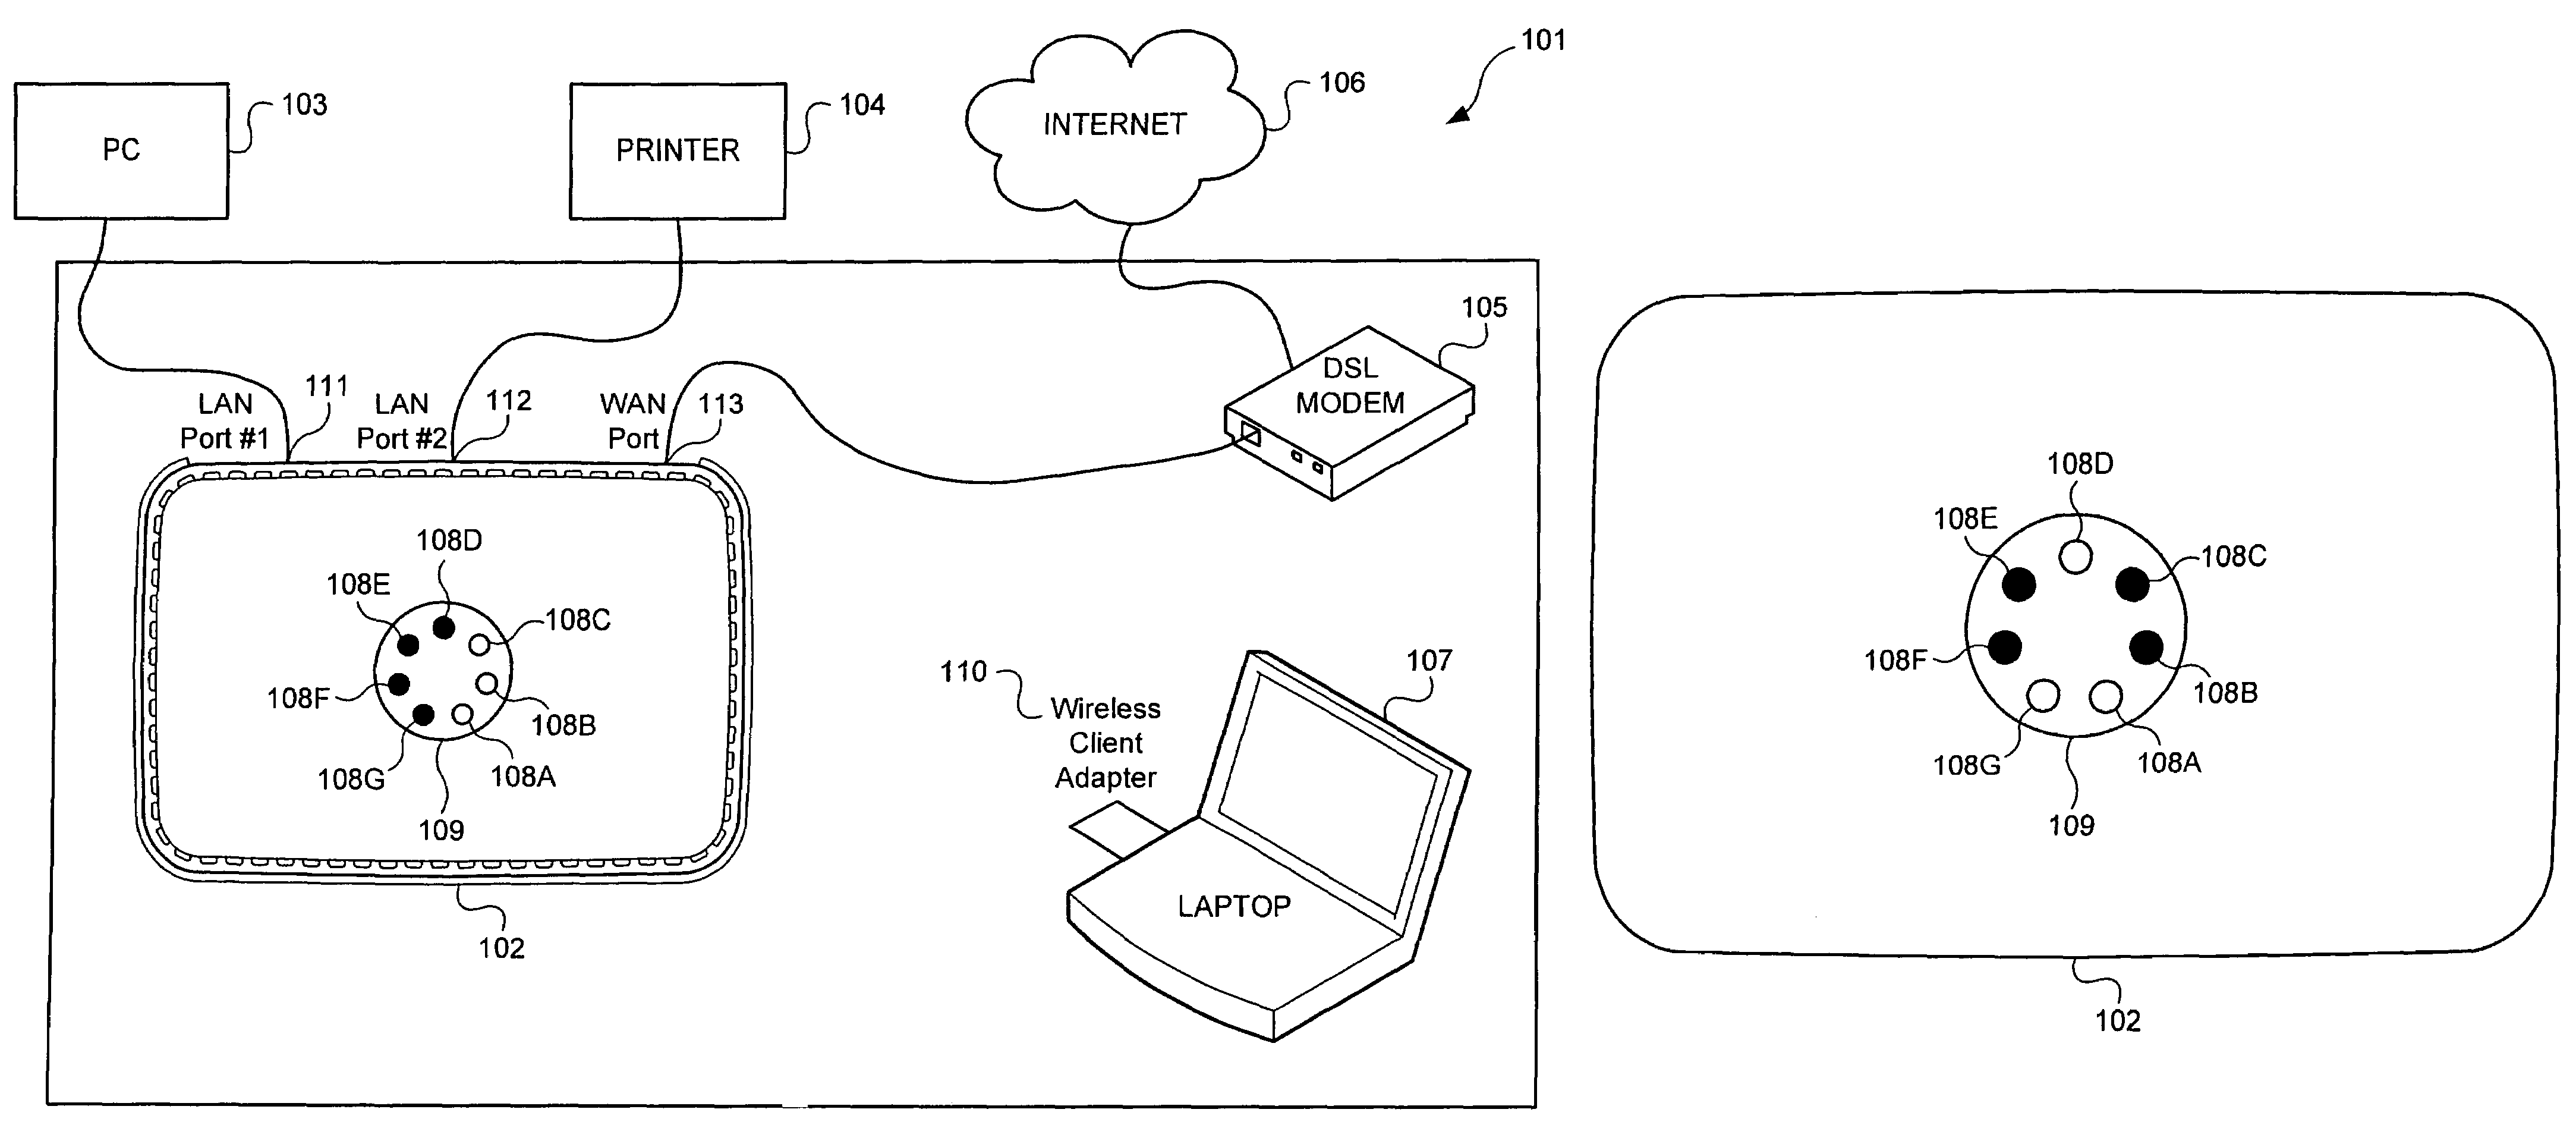 Peripheral device with visual indicators